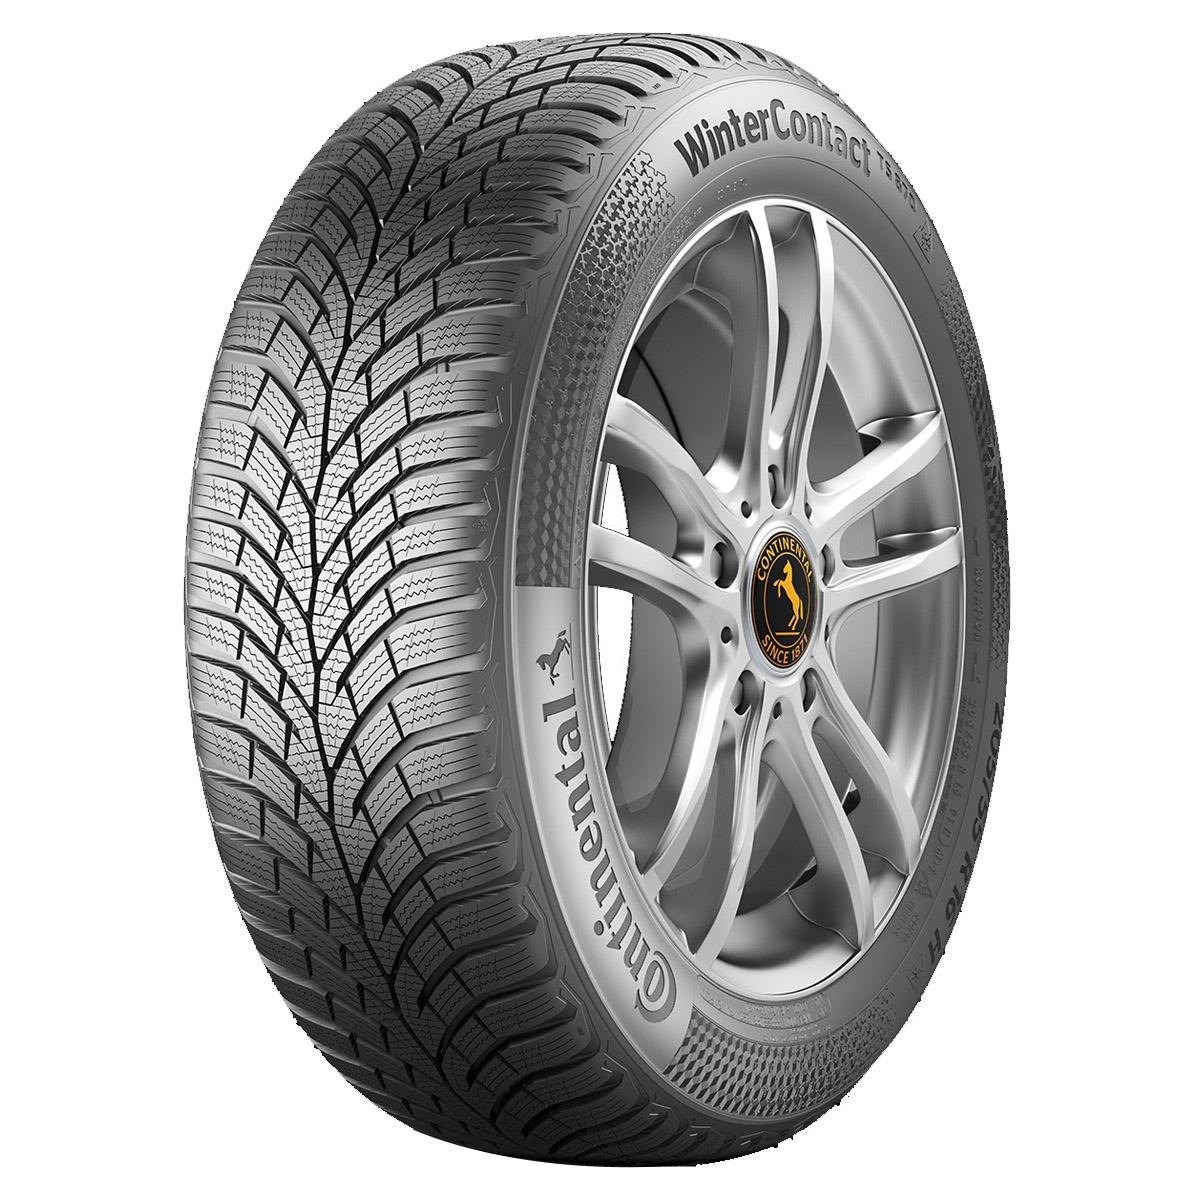 Anvelope iarna CONTINENTAL WINTER CONTACT TS870 P FR 215/65 R16 98T